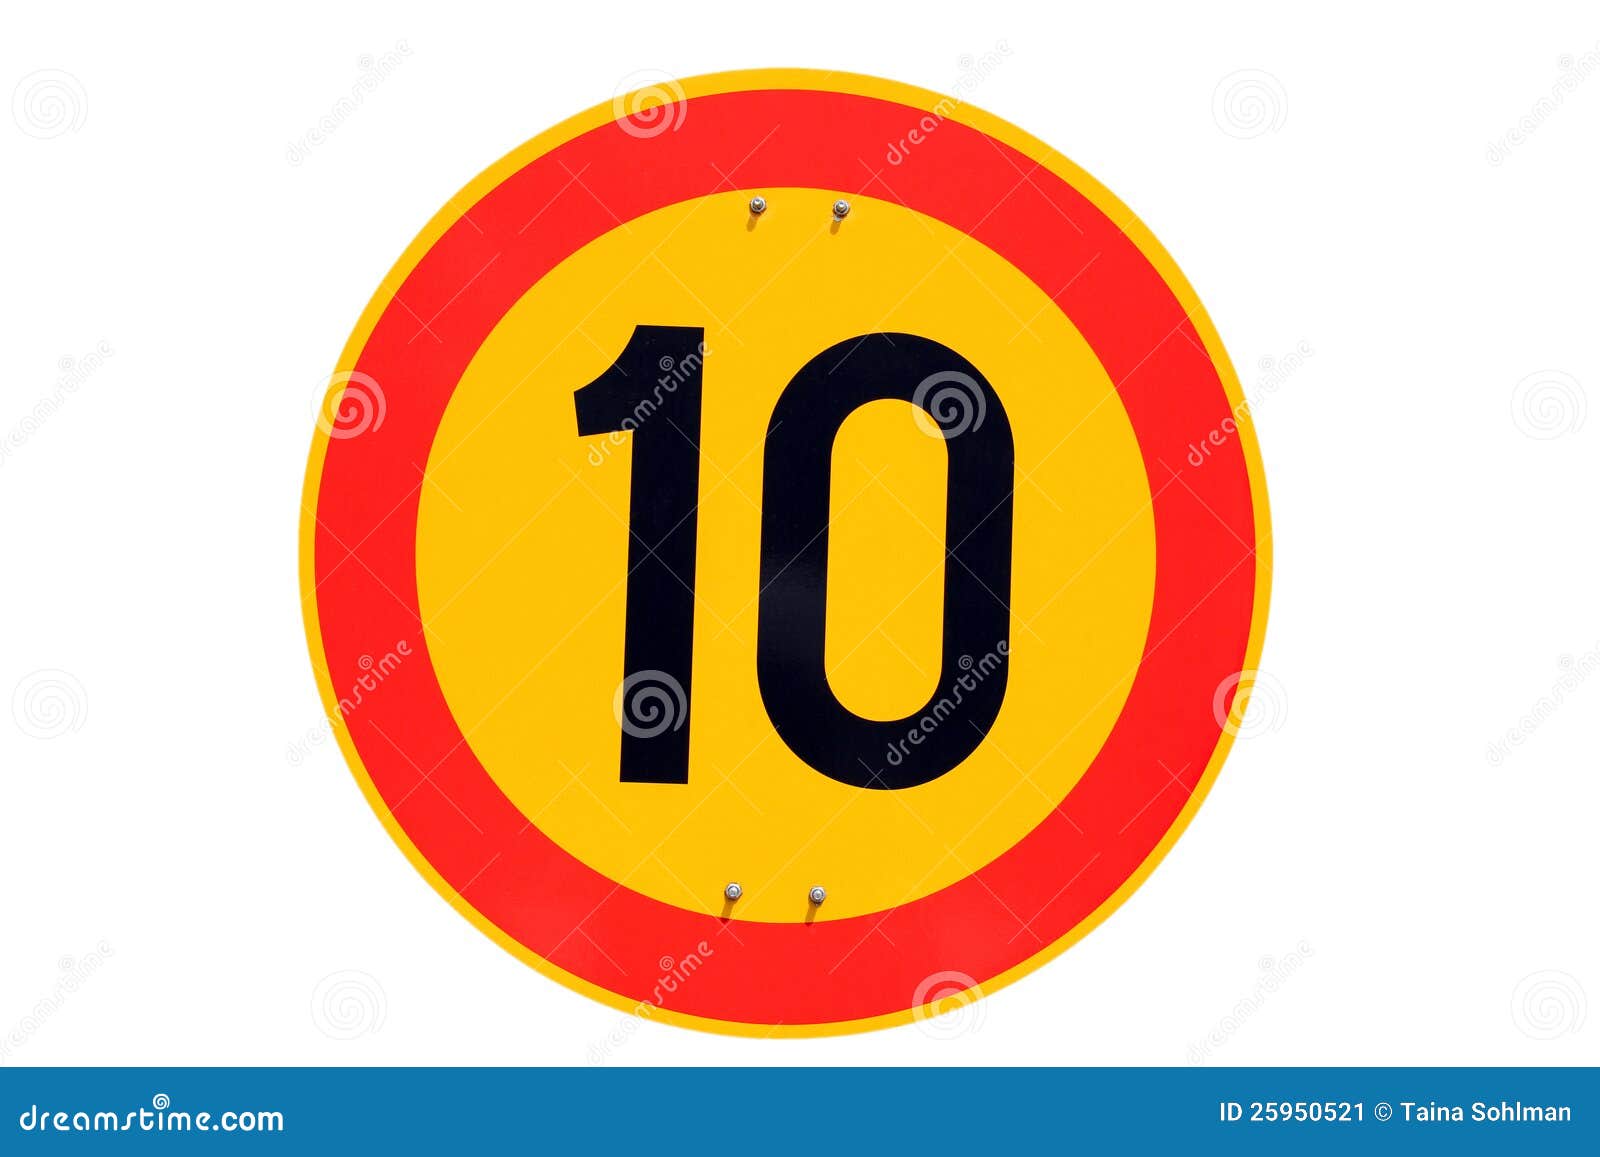 Speed Limit Traffic Sign 10 Km Per Hour Stock Image Image Of Numbers Miles